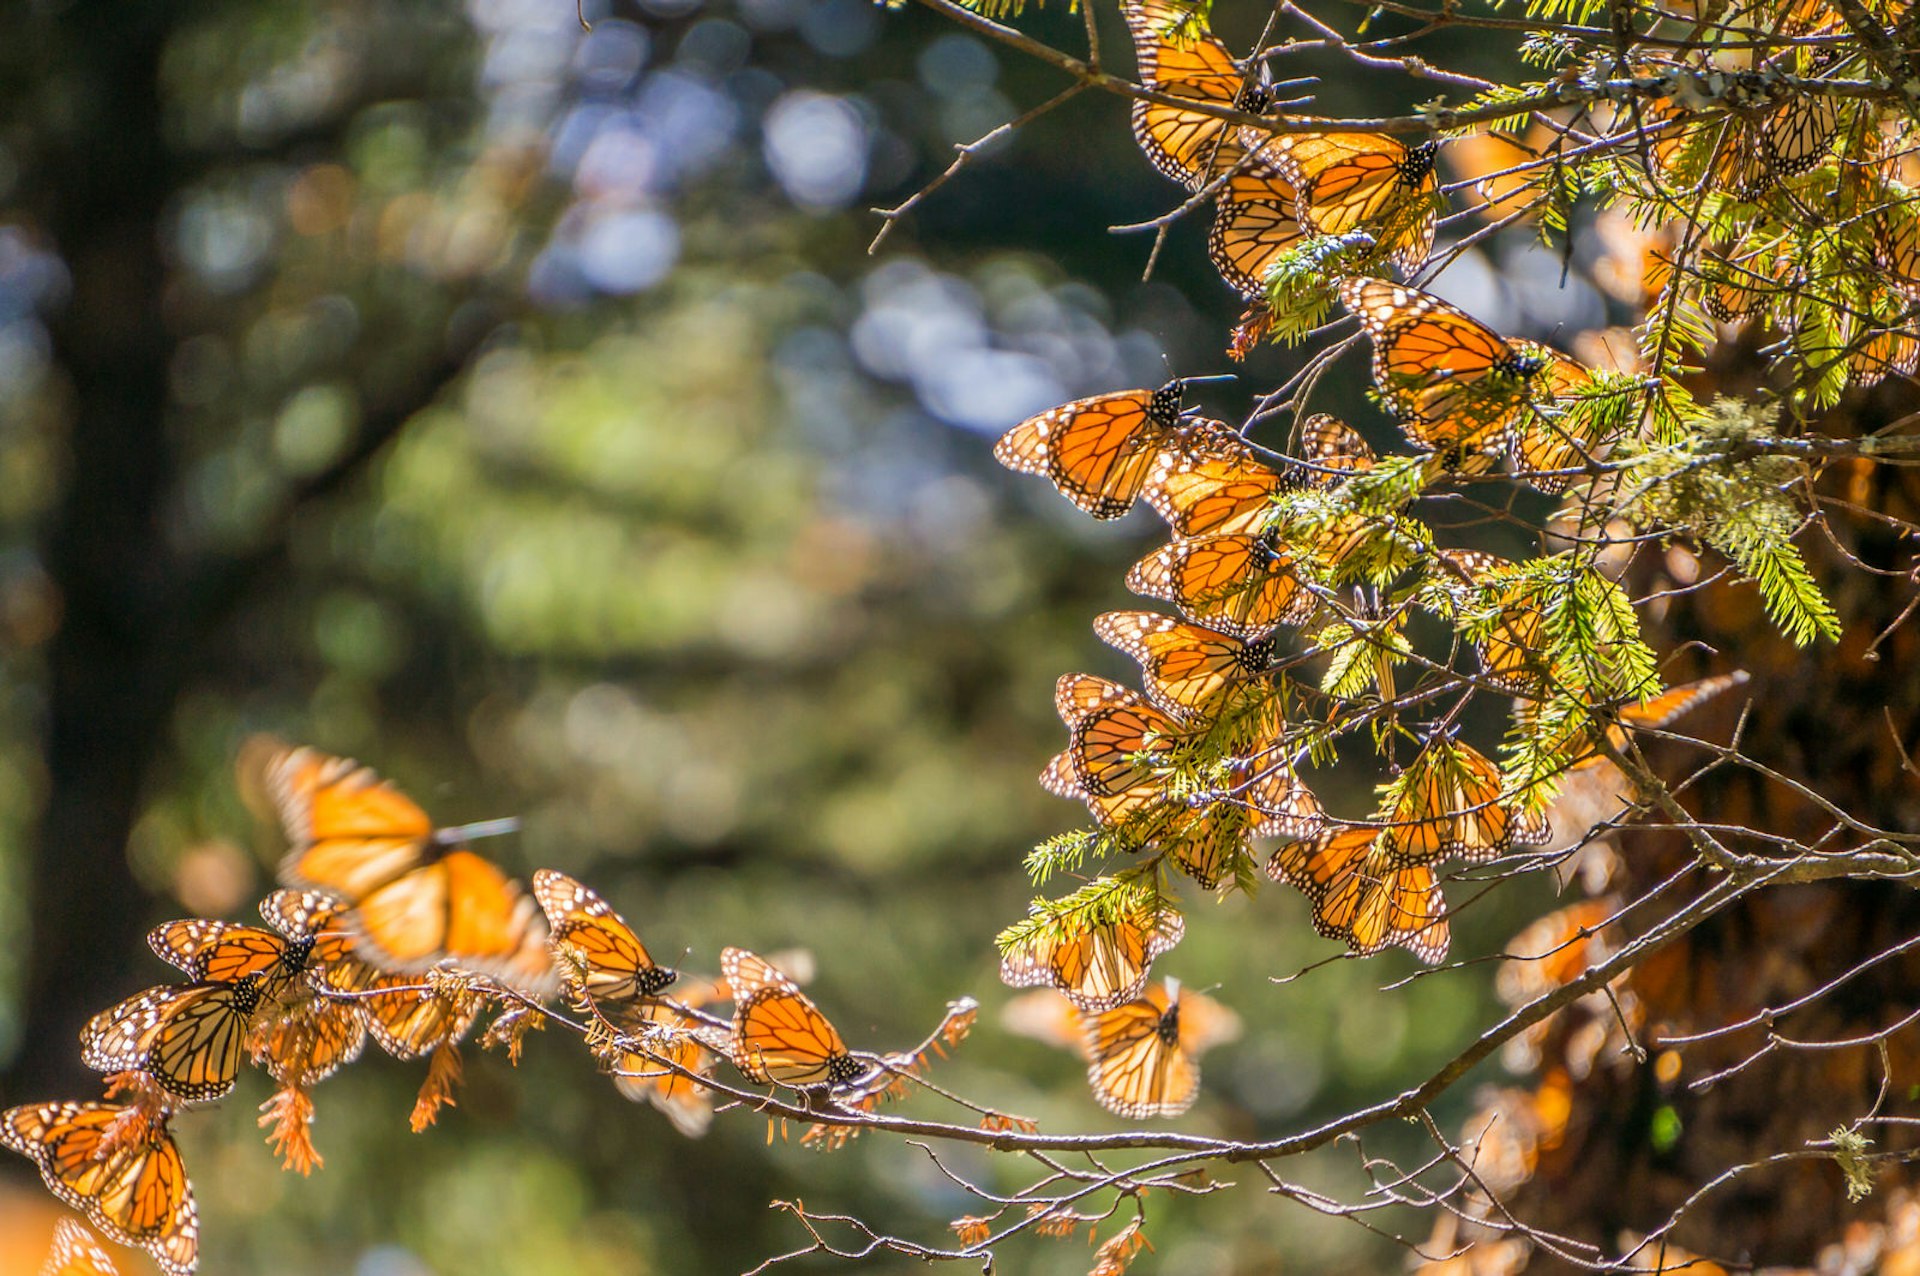 Multiple black-and-orange monarch butterflies on a branch